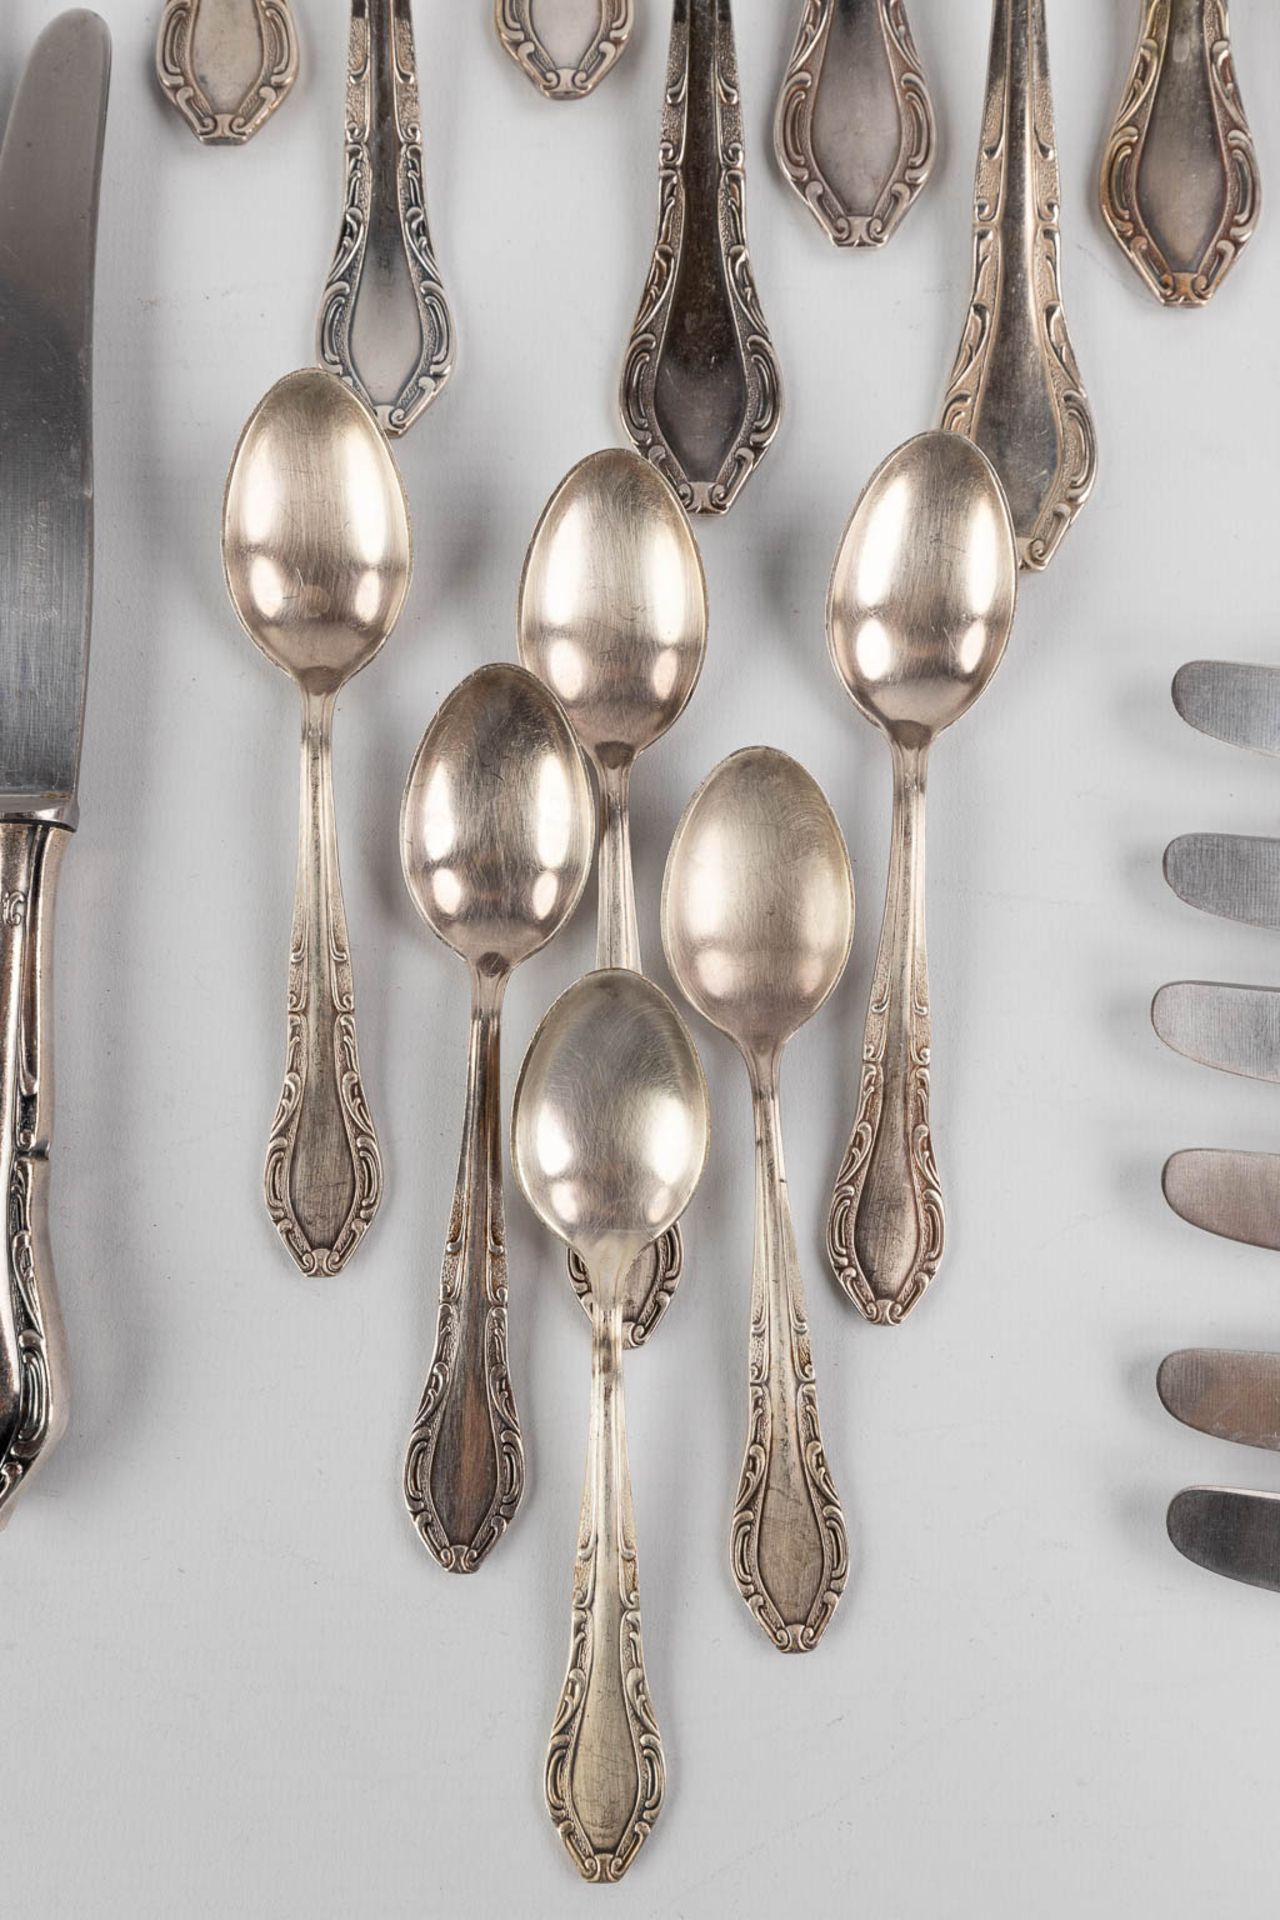 A large collection of serving accessories and cutlery, silver-plated metal. (W:35 cm) - Image 4 of 9